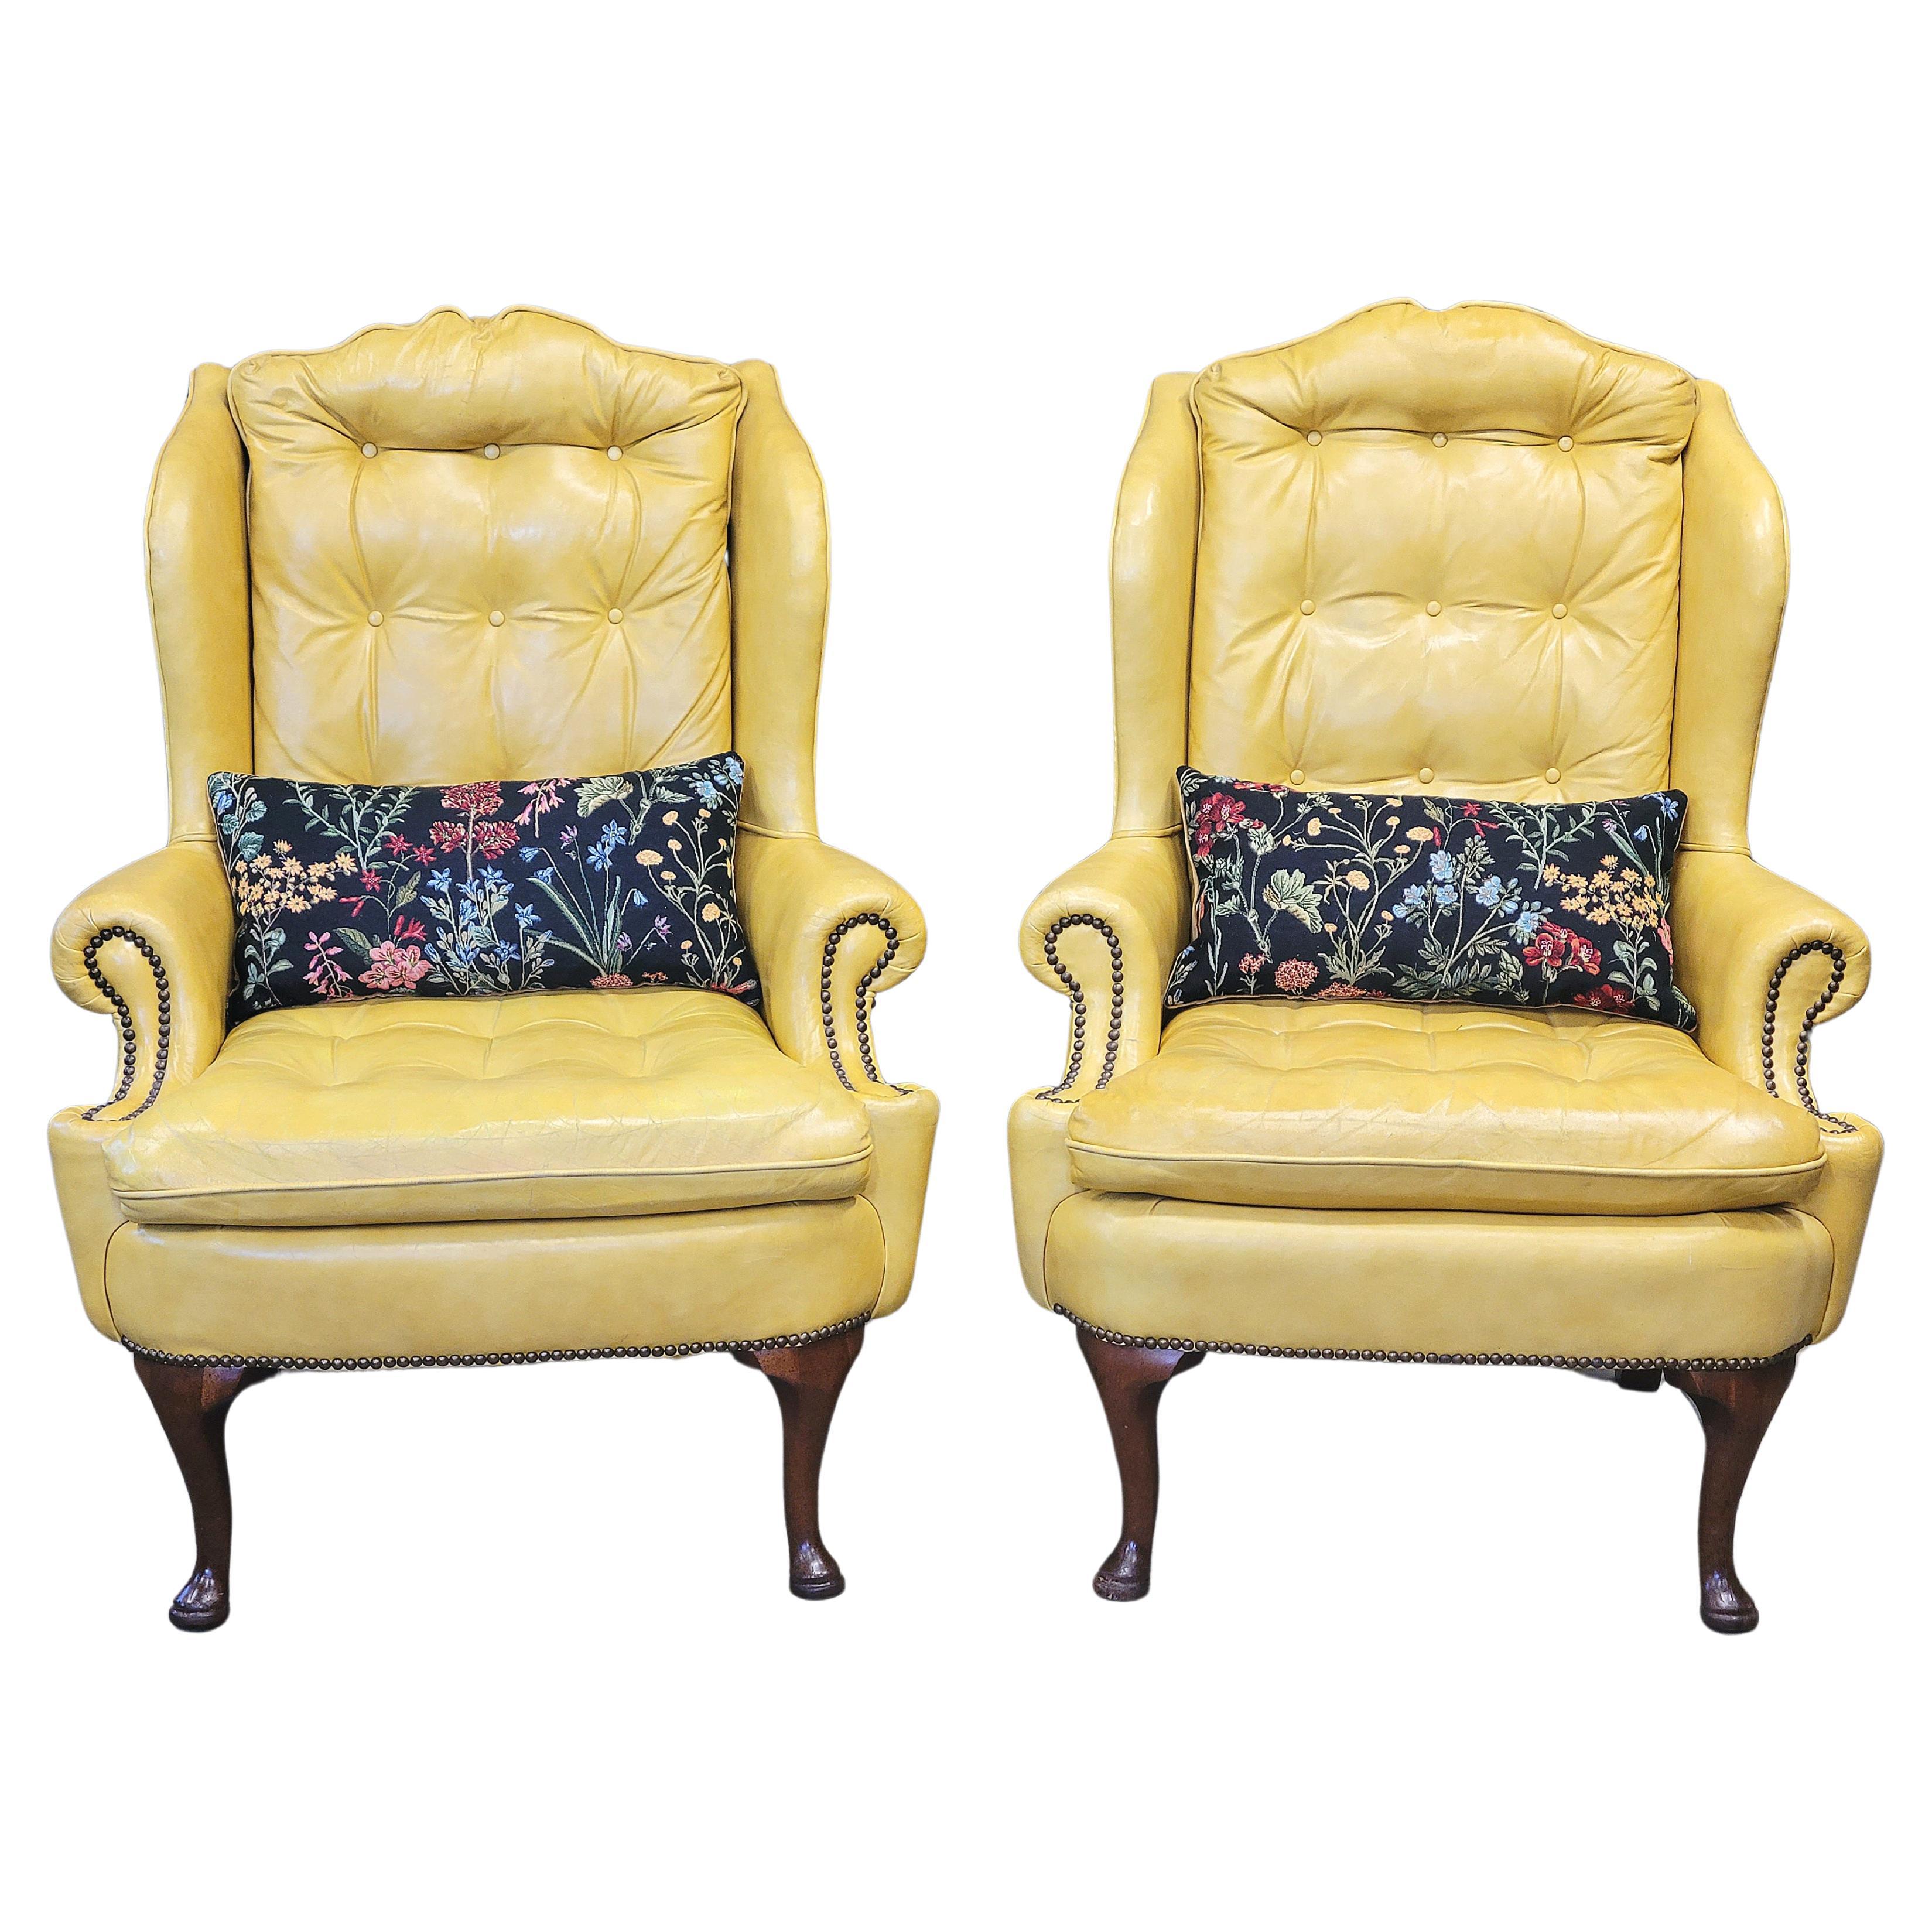 Vintage Classic Brand Top Grain Yellow Leather Chesterfield Chairs - a Pair For Sale